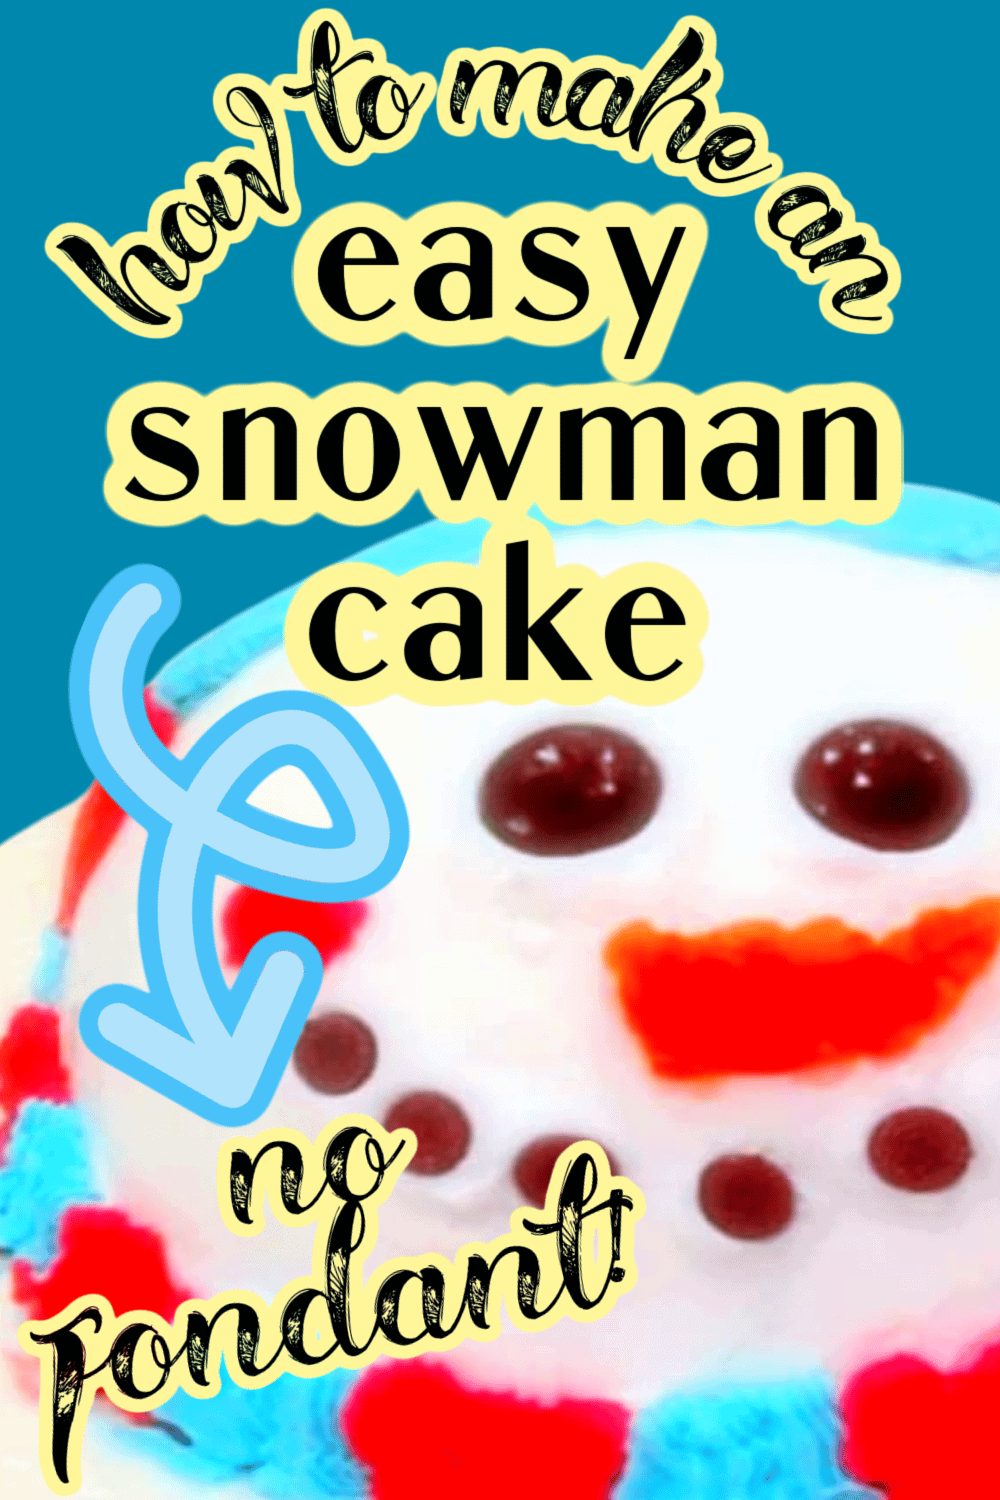 Easy snowman theme cake (homemade snowman cakes are easier than you think!)